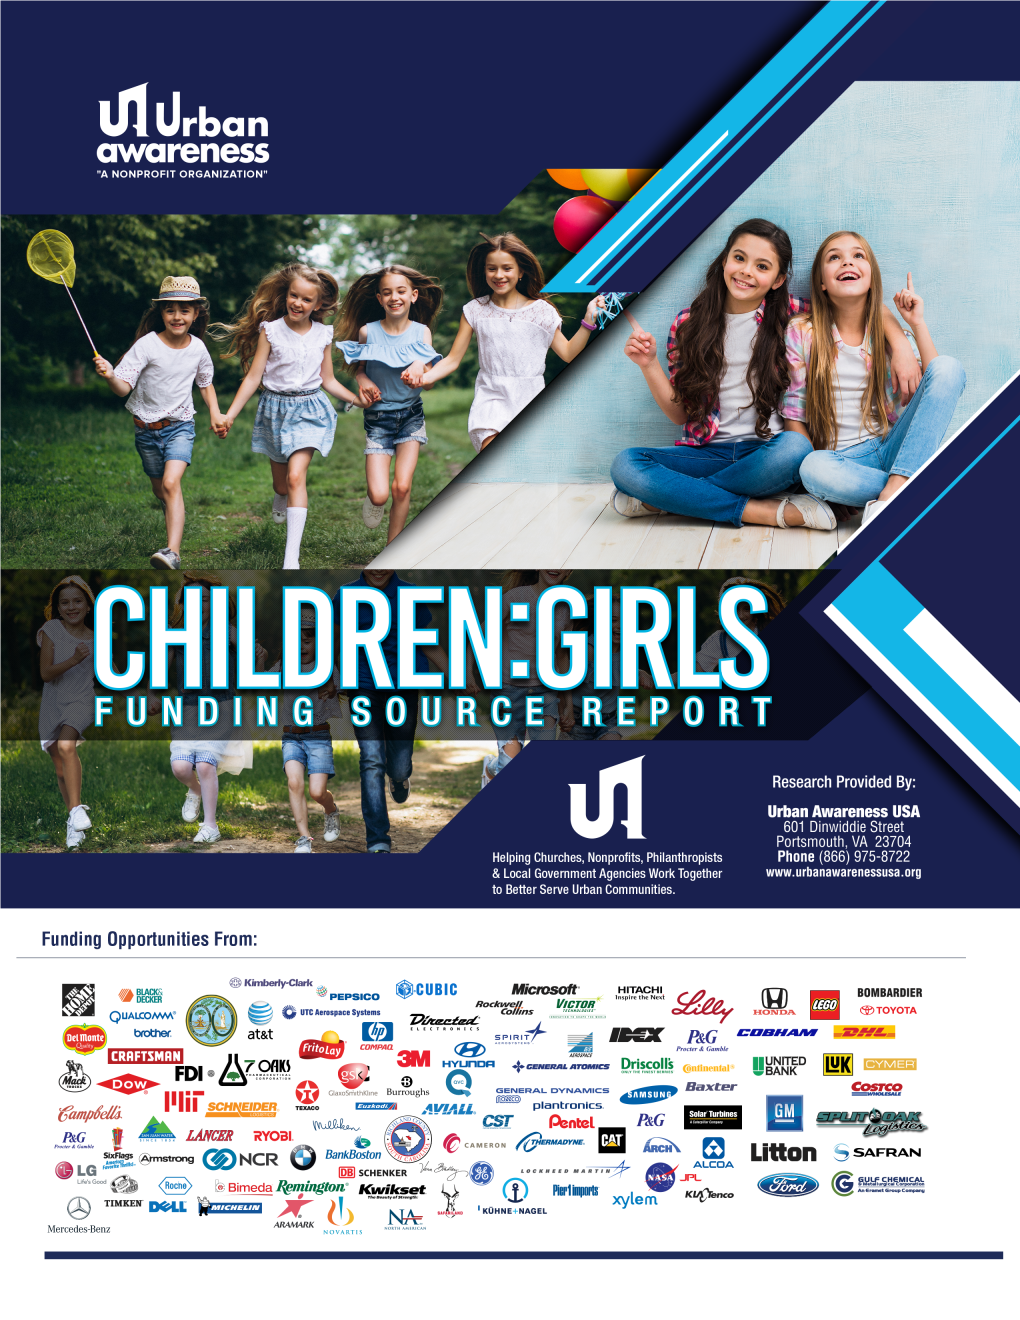 Children - Girls Funding Source Report 1 TABLE of CONTENTS